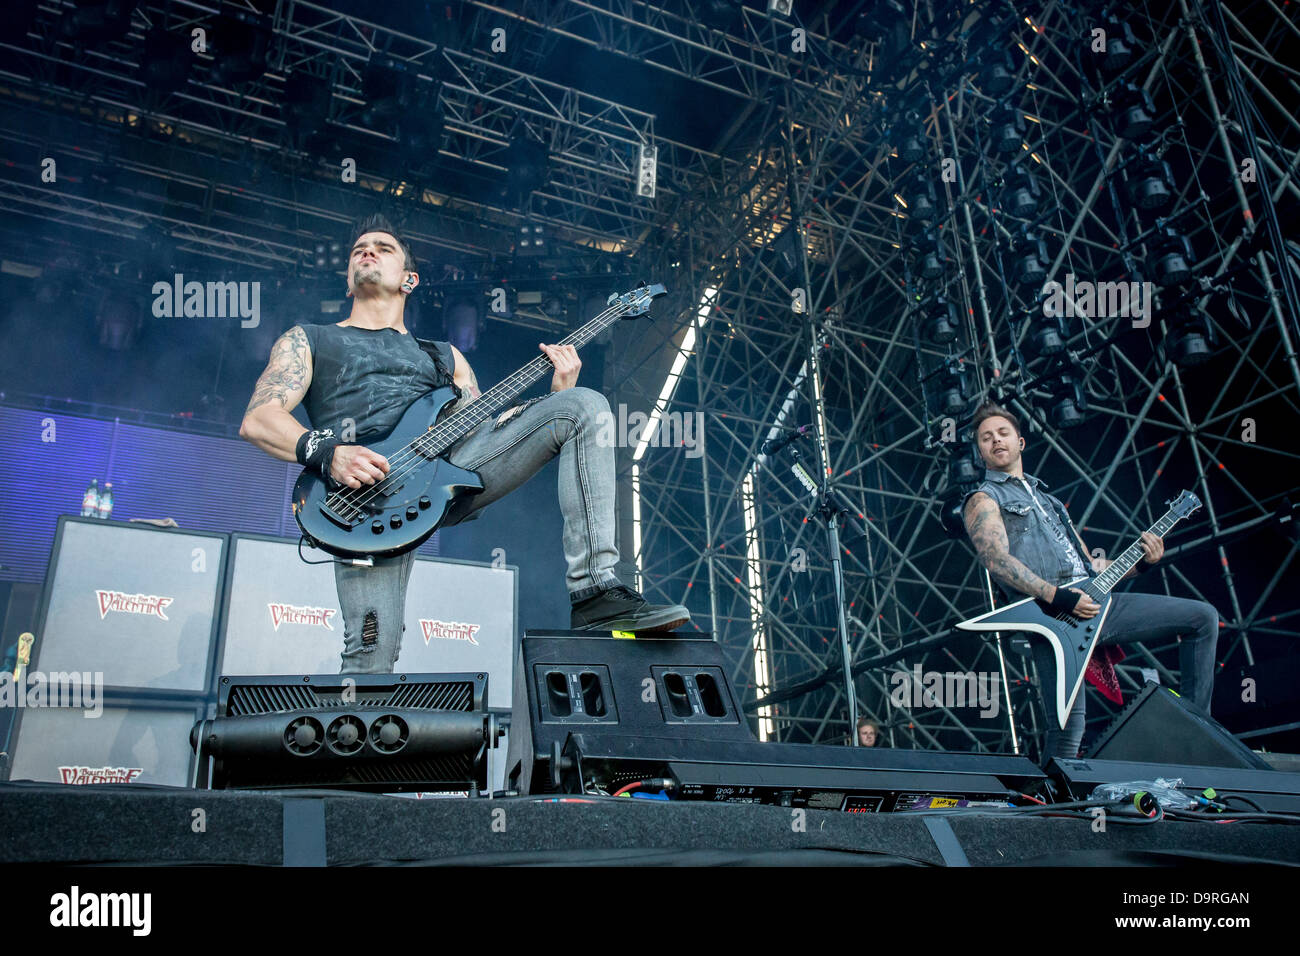 Milan Italy. 24th June 2013. The British metal core band BULLET FOR MY VALENTINE performs live at Ippodromo del Galoppo opening the show of Korn Credit:  Rodolfo Sassano/Alamy Live News Stock Photo